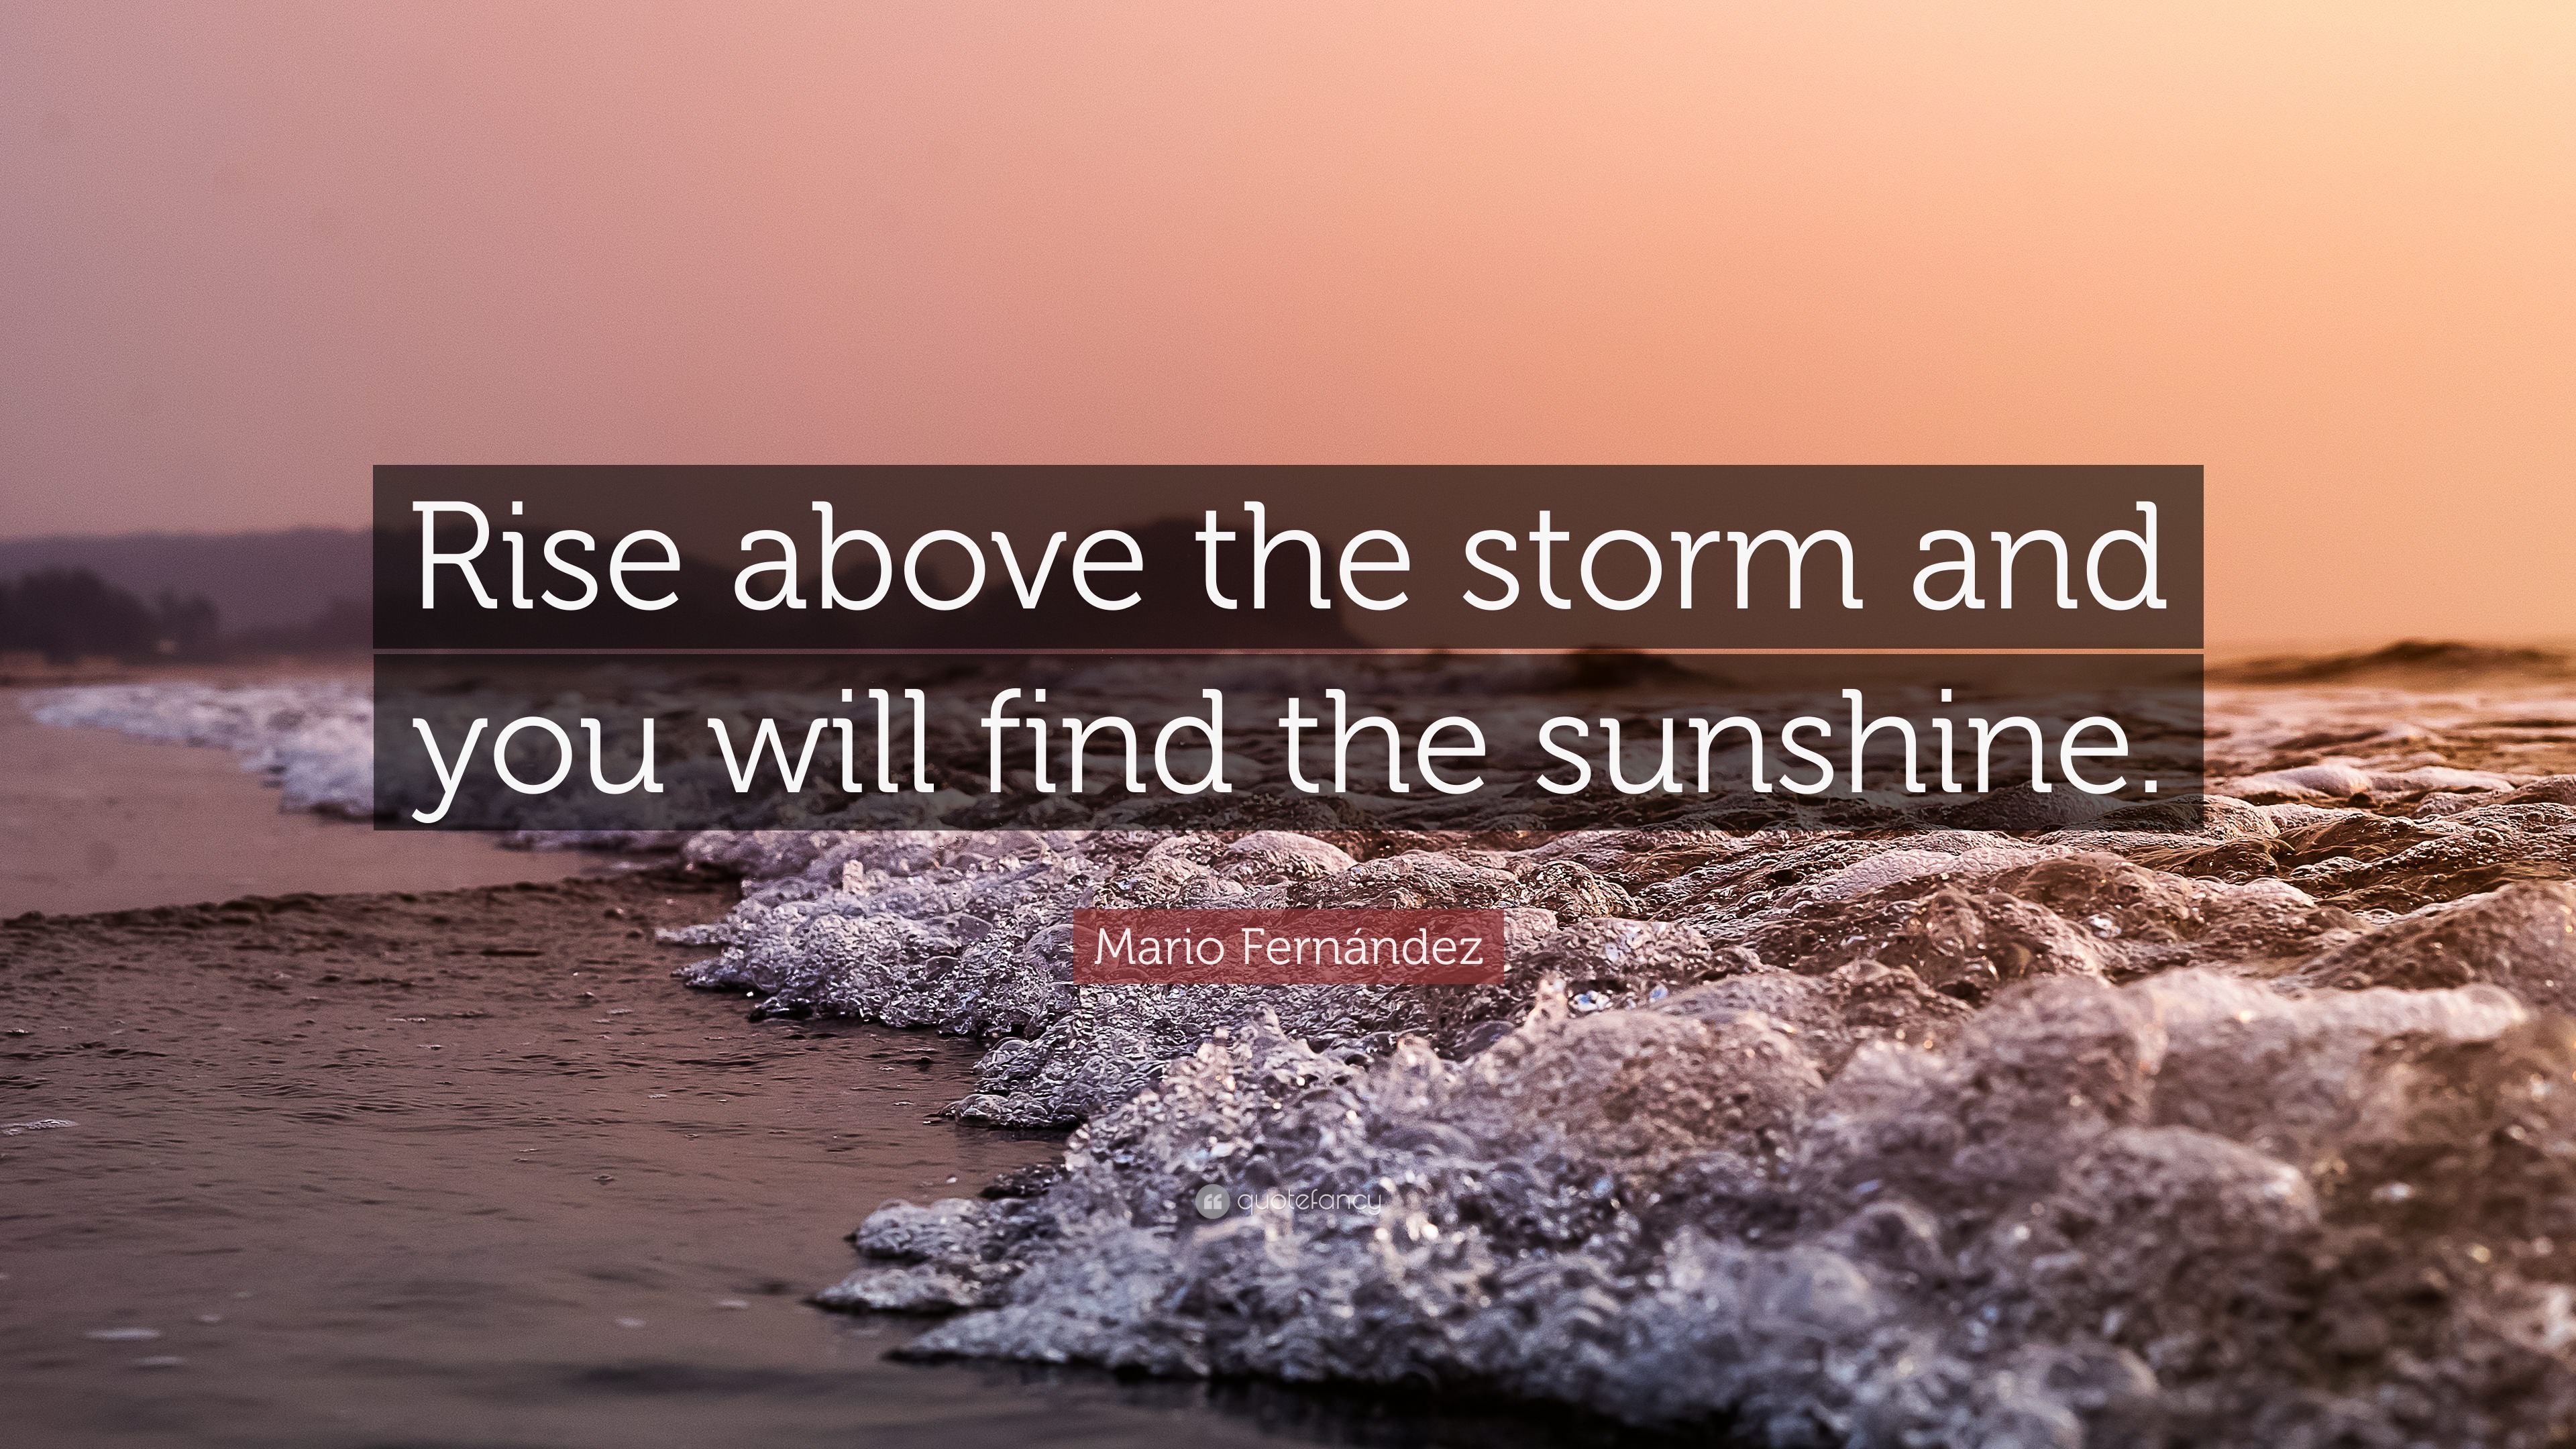 Rise above the storm and you will find the sunshine inspirational